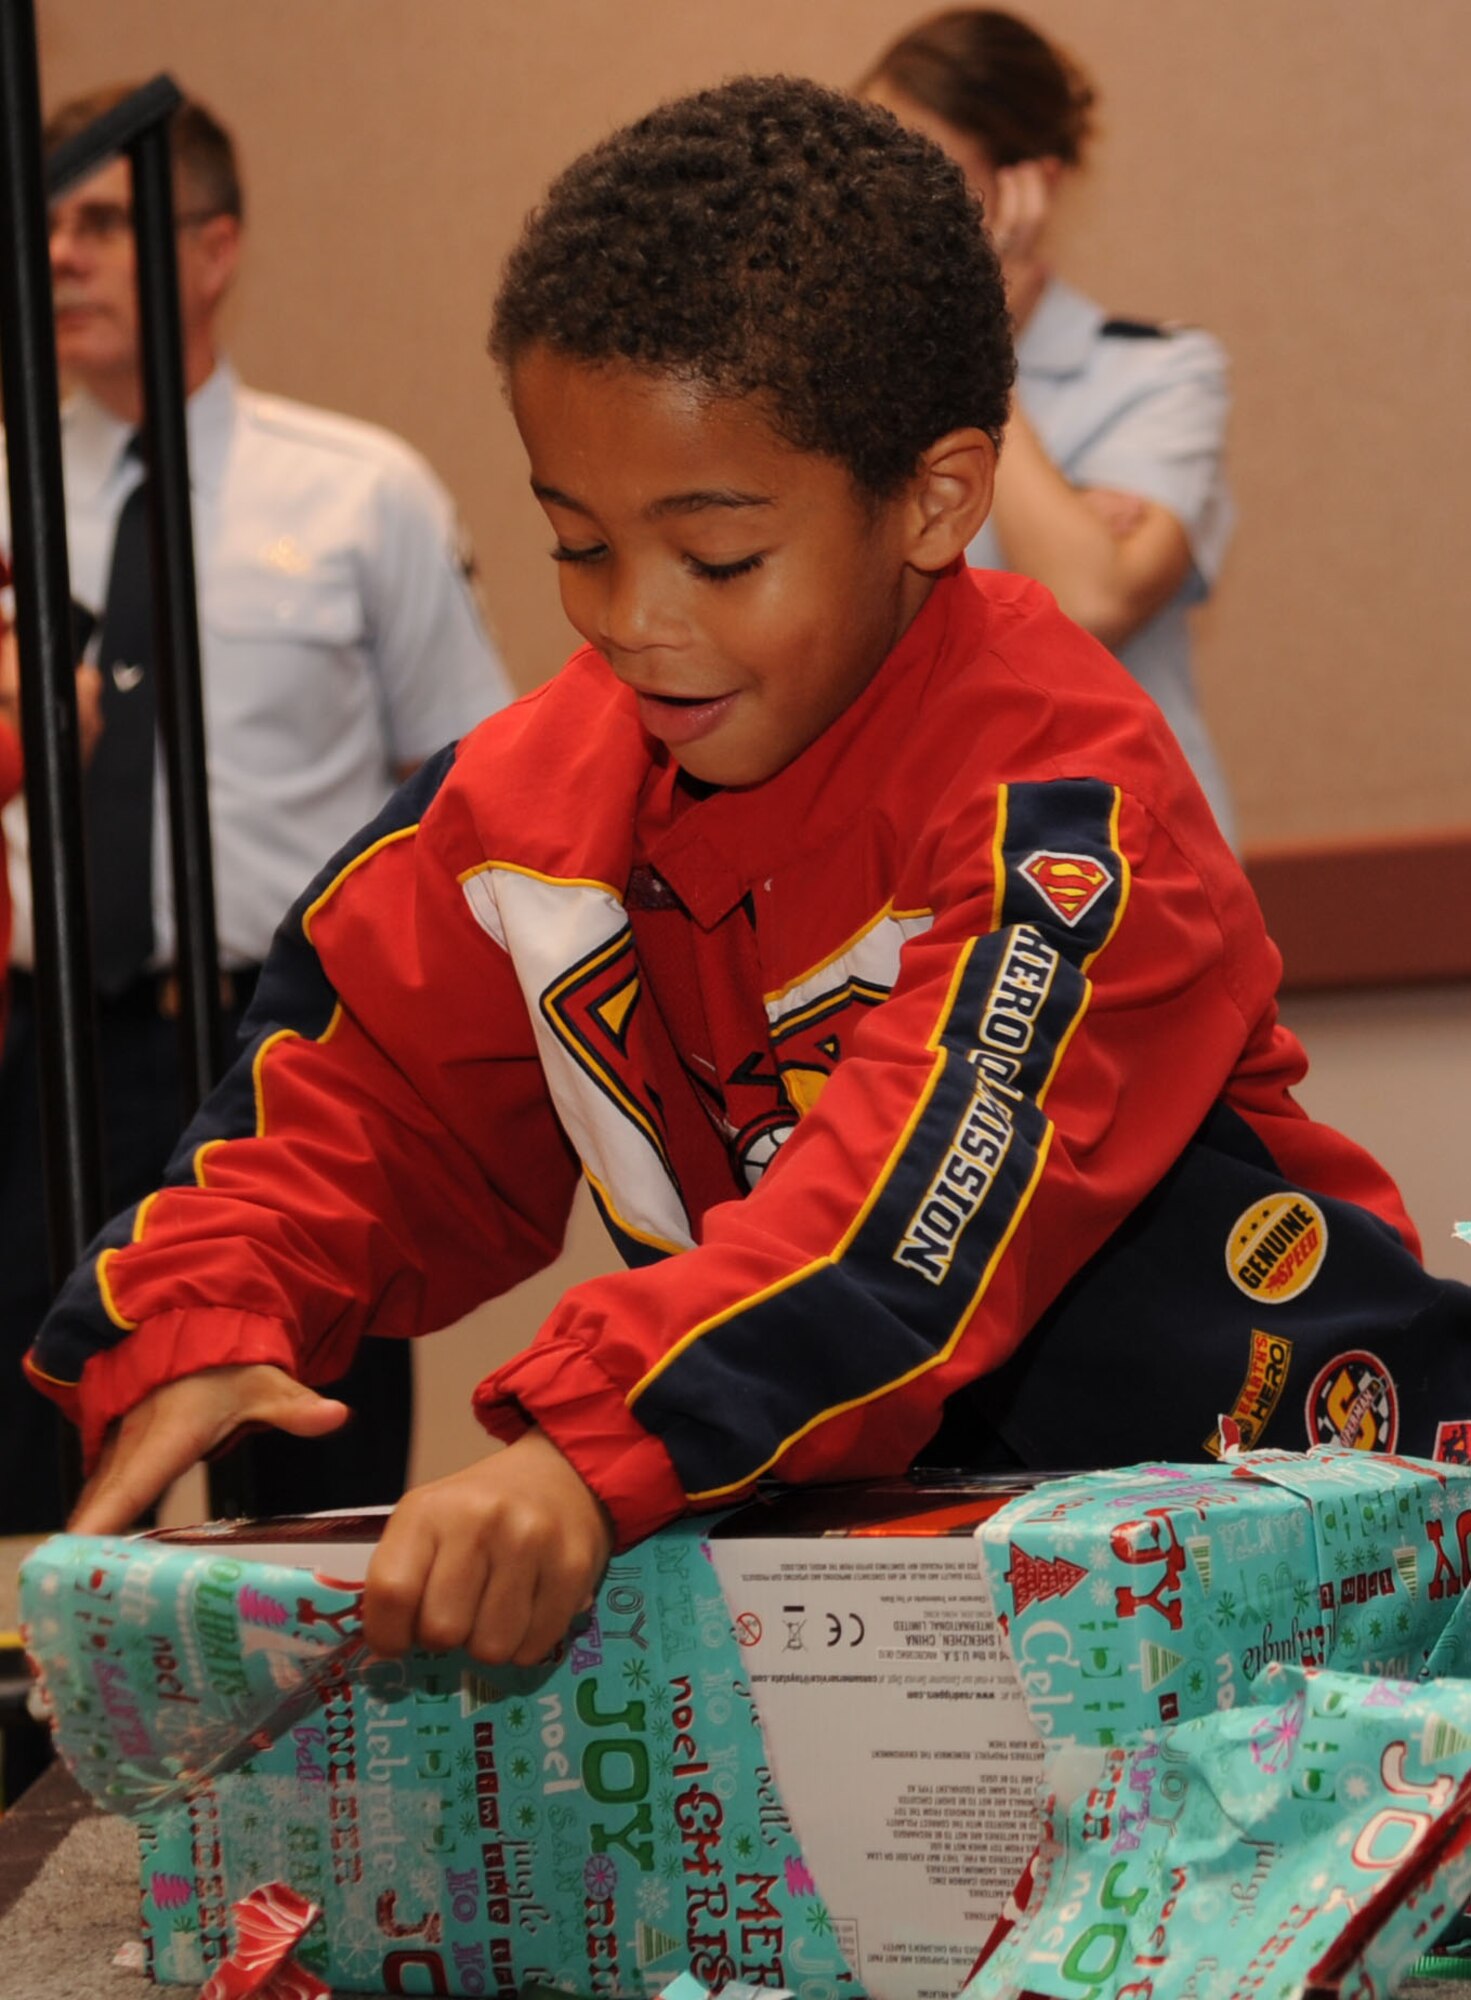 Jacob Thrasher, 6, opens gifts during the Santa?s in Blue event at the Bossier City Civic Center in Bossier City, La., Dec. 18. Santa?s in Blue is a program sponsored by the Air Force Sergeants Association and Barksdale Top Three to provide gifts for more than 400 children in foster care. (U.S. Air Force photo/Airman 1st Class Sean Martin)(Released)